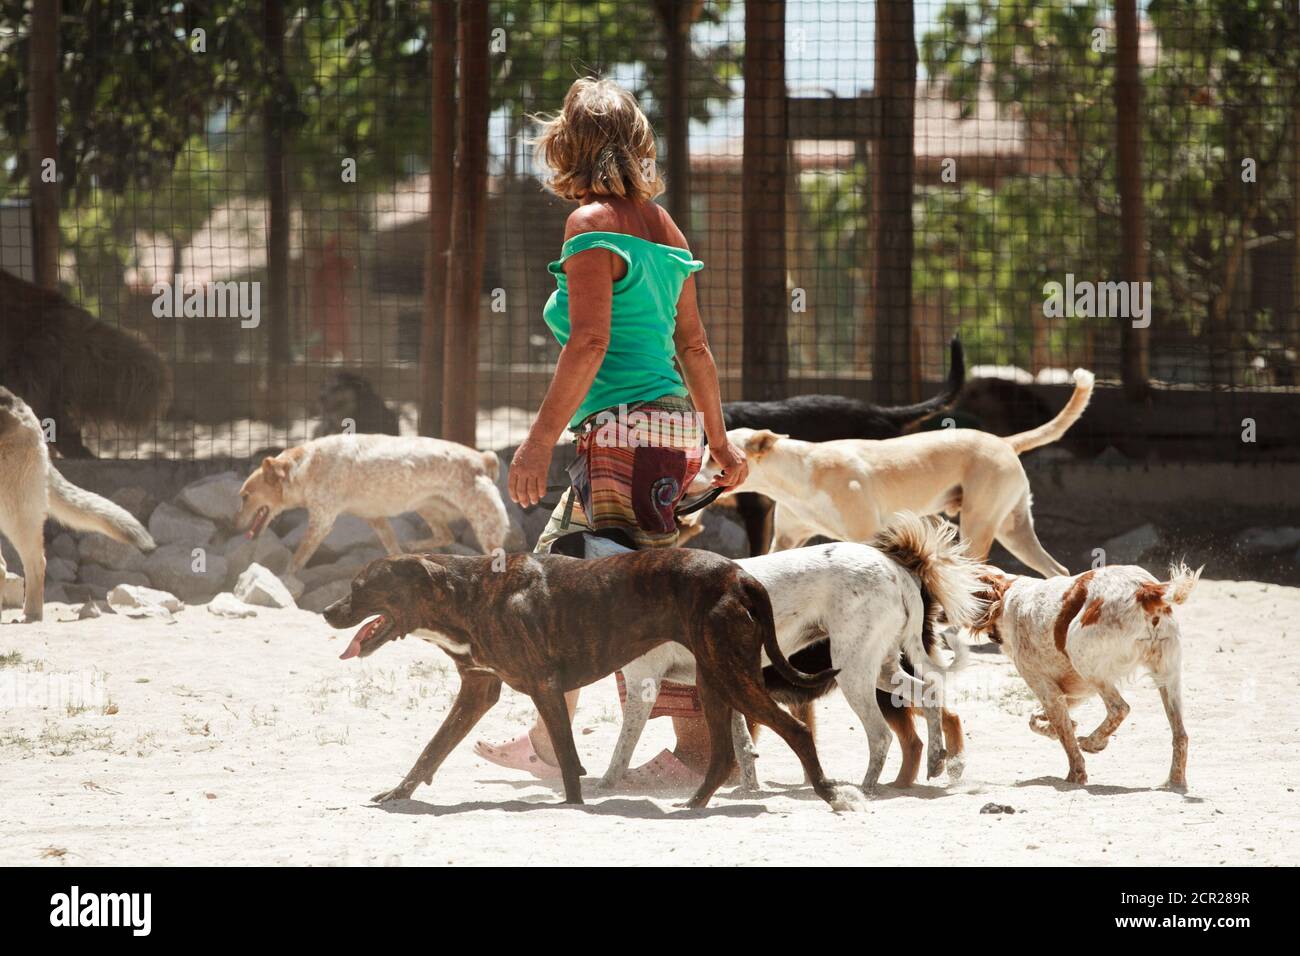 Women walking with a pack of dogs in the park of a dog shelter. Stock Photo